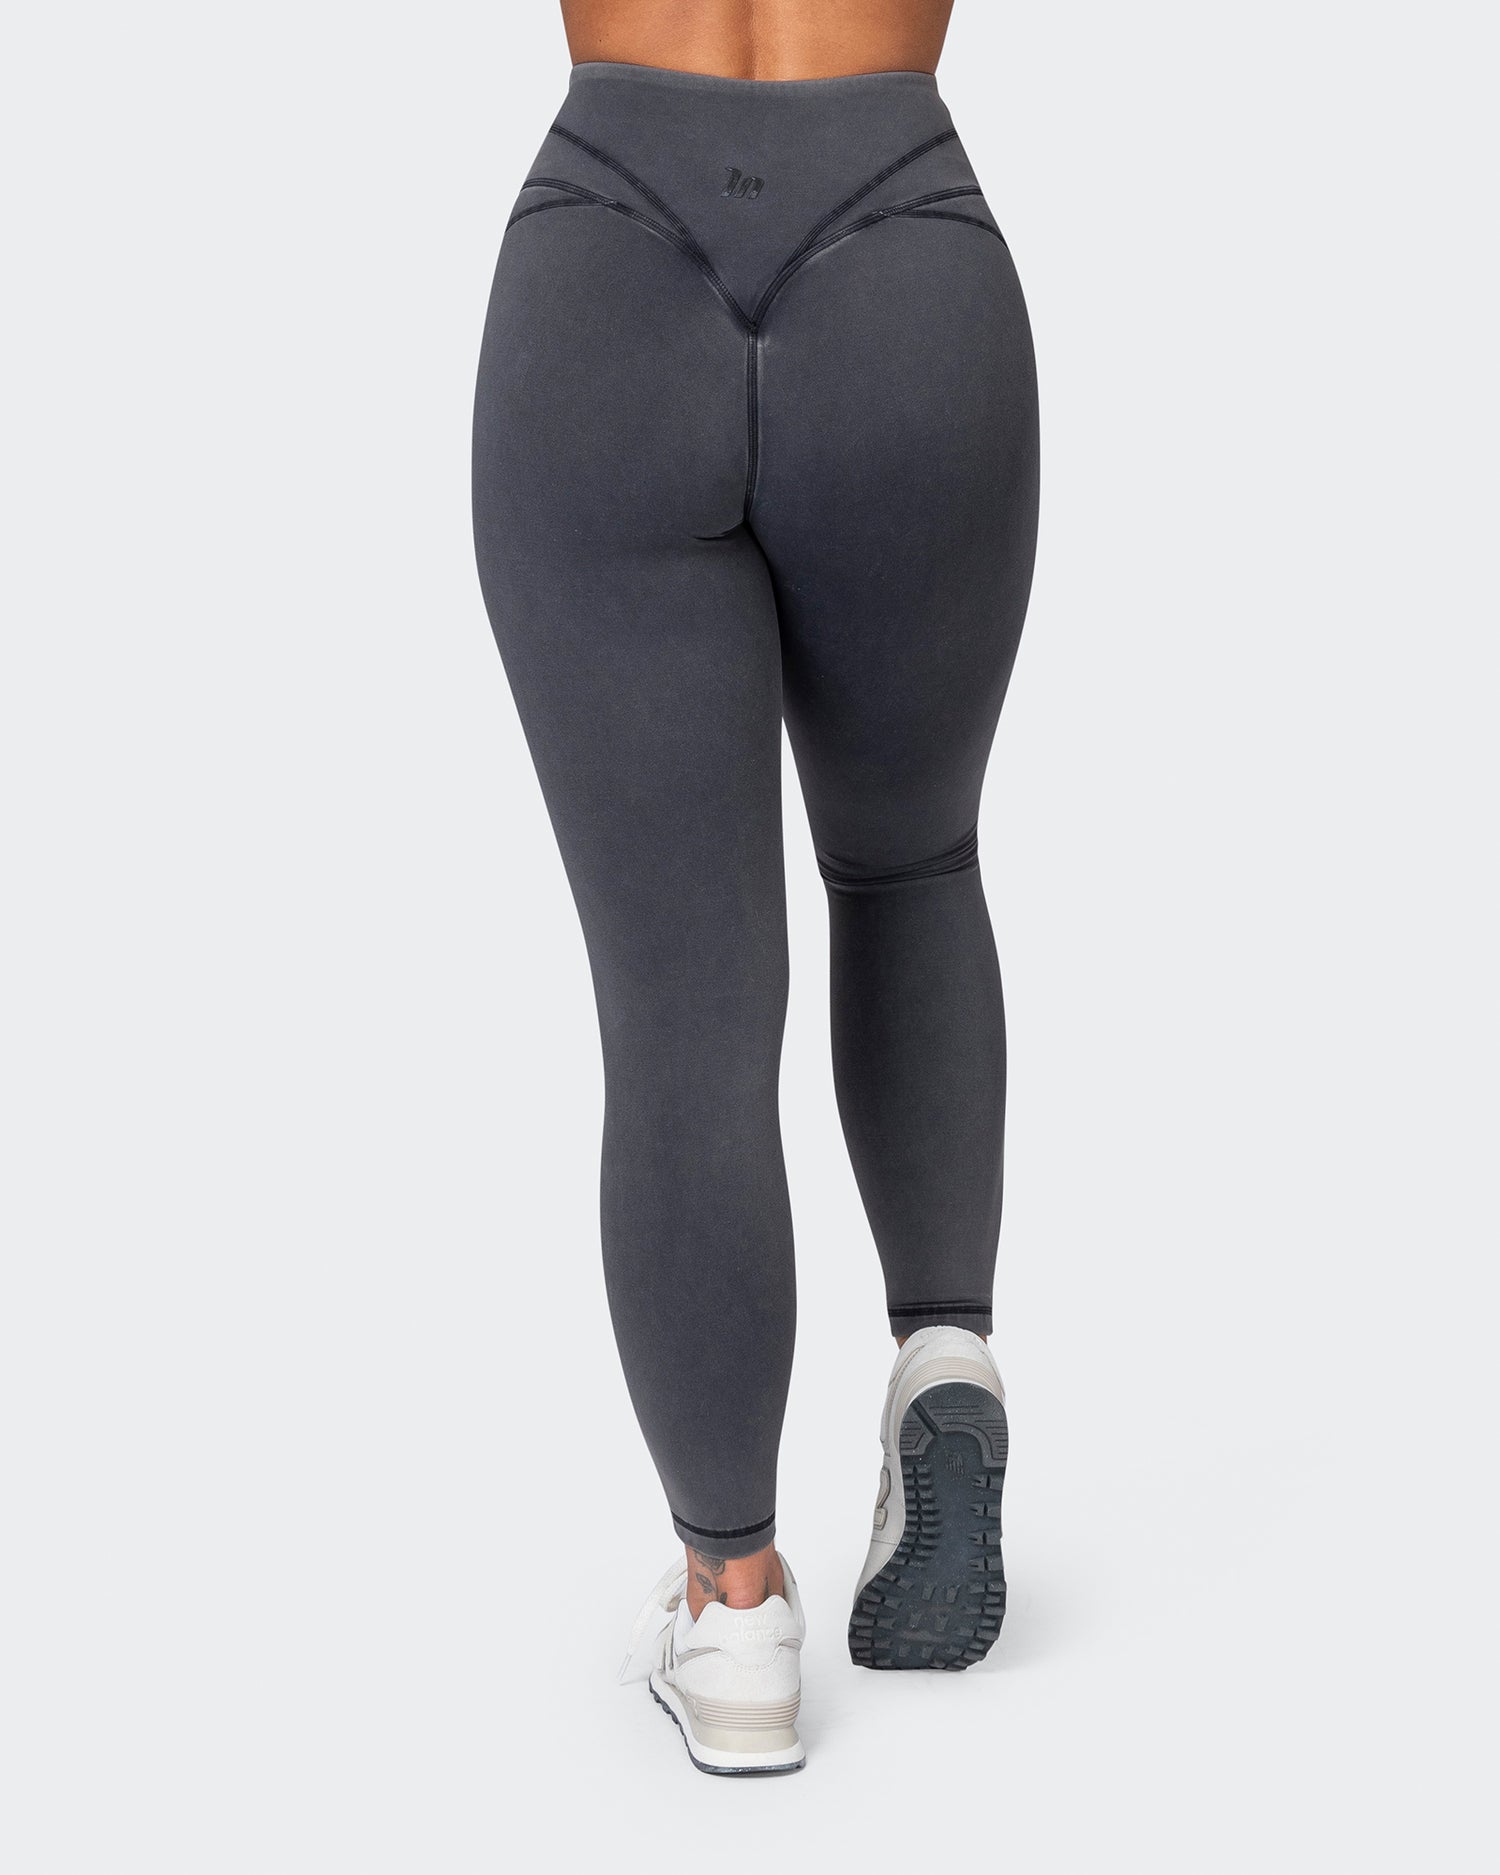 Second Skin Ankle Length Leggings - Washed Black - Muscle Nation